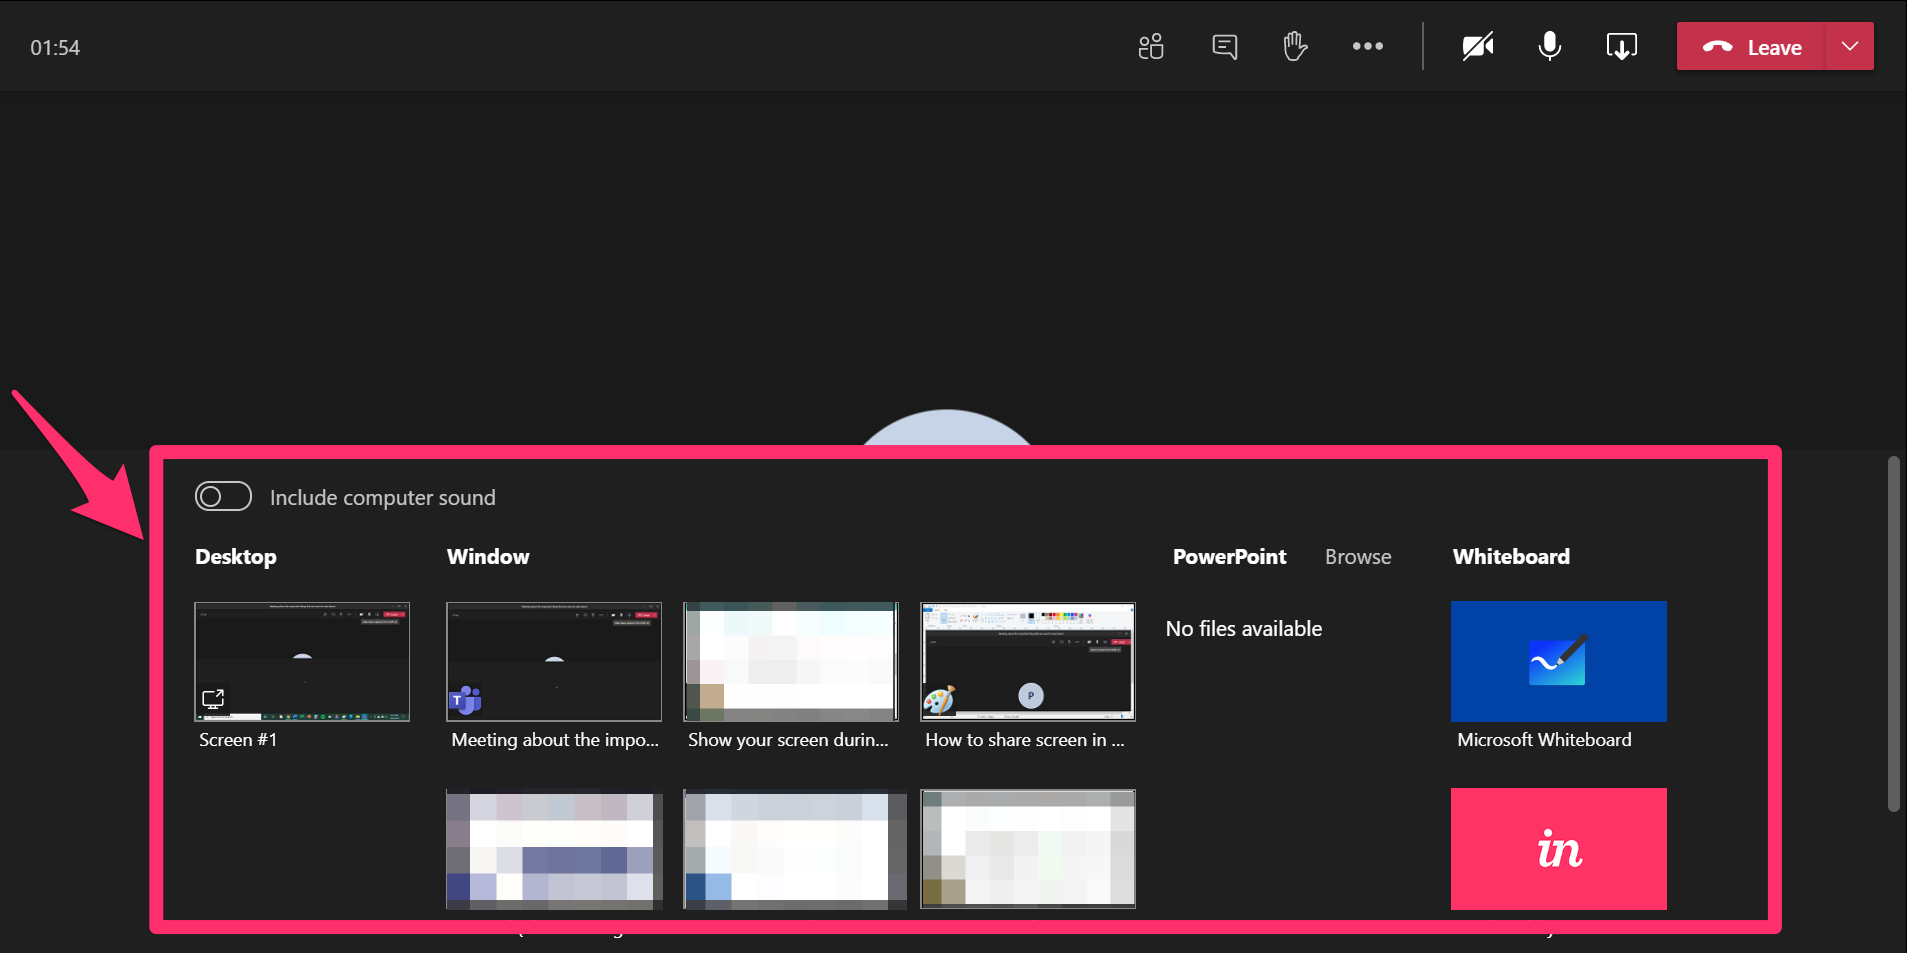 How to share your screen on Microsoft Teams during a video conference